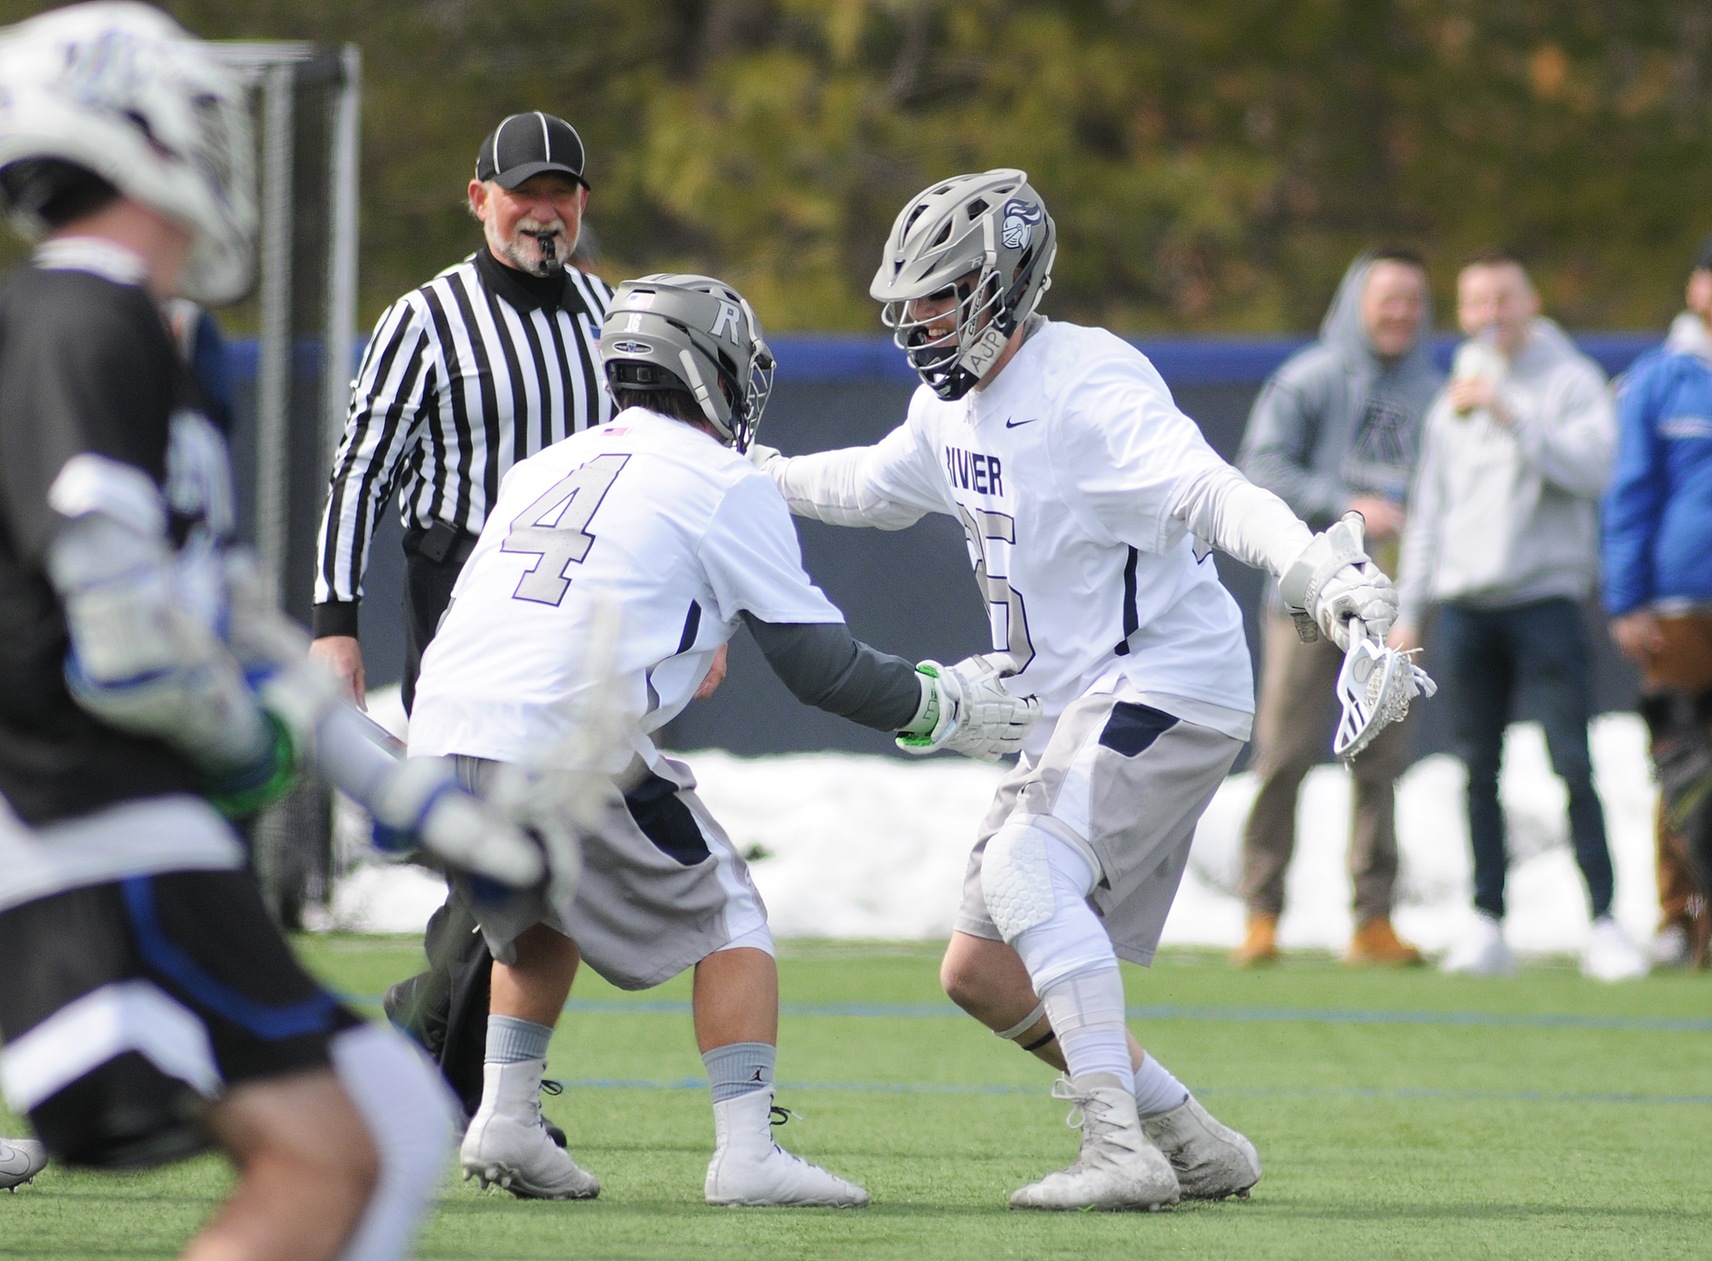 Men's Lacrosse: Larsen scores 100th career goal and leads Raiders to victory over the AMCATS, 7-6